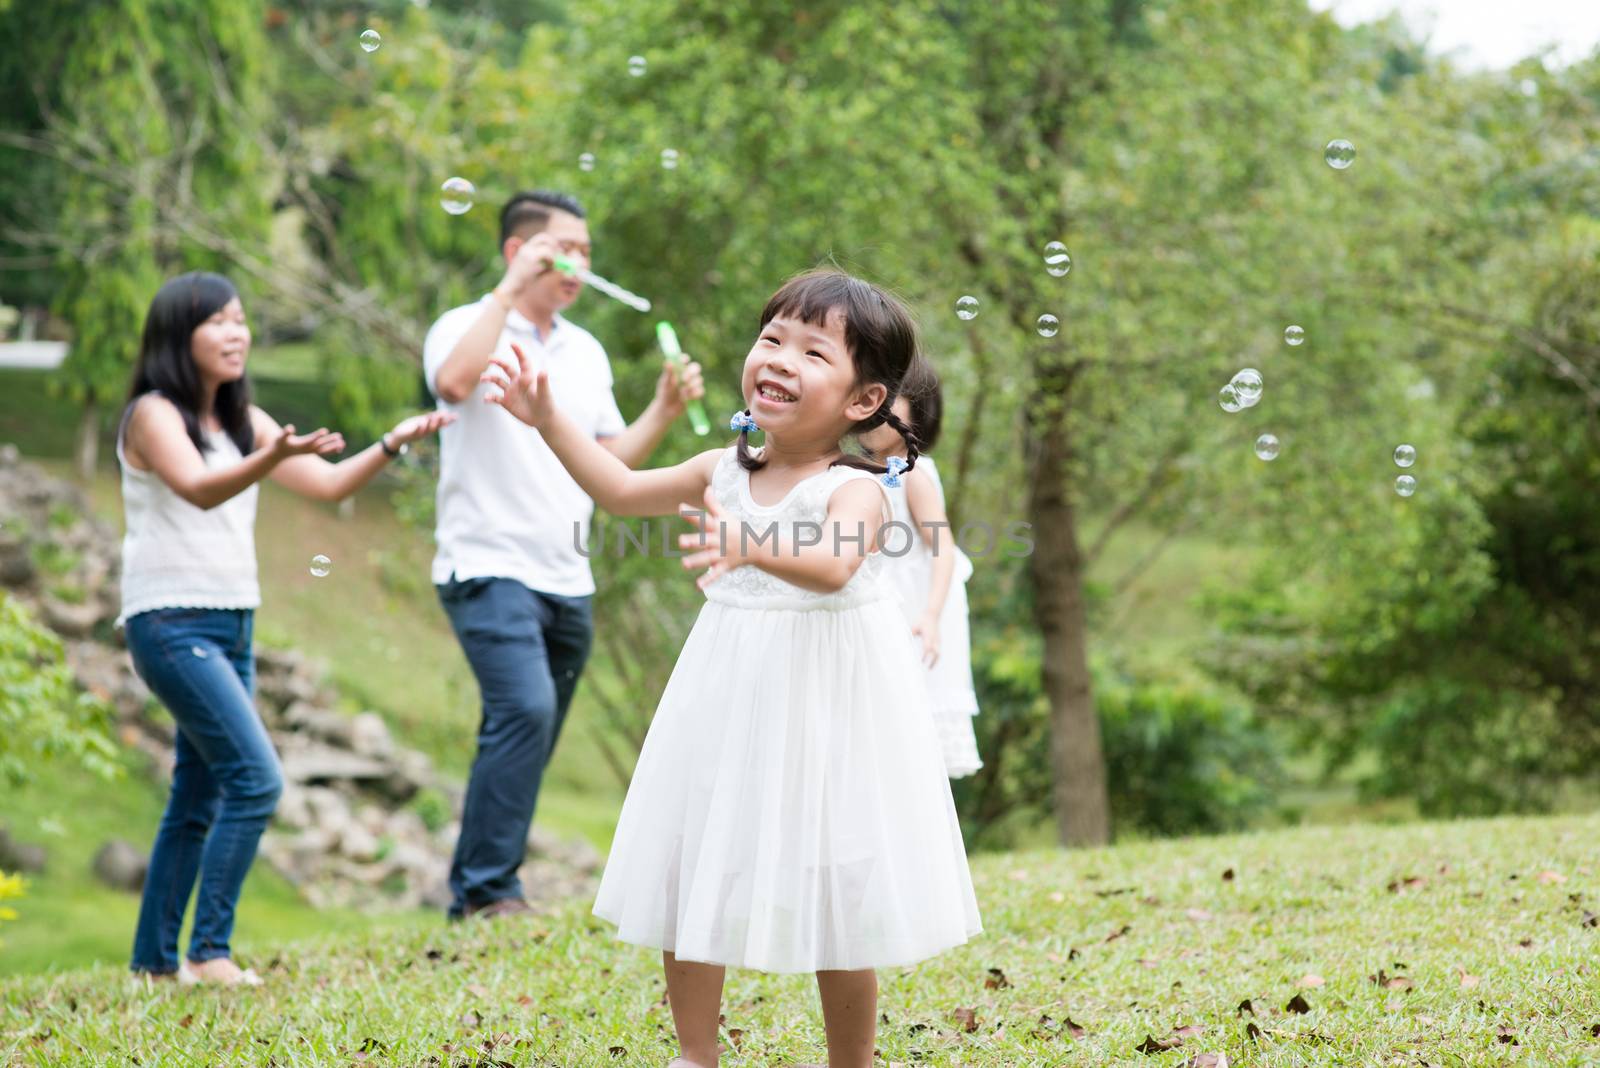 Parents and children blowing soap bubbles at park. Asian family outdoors activity.